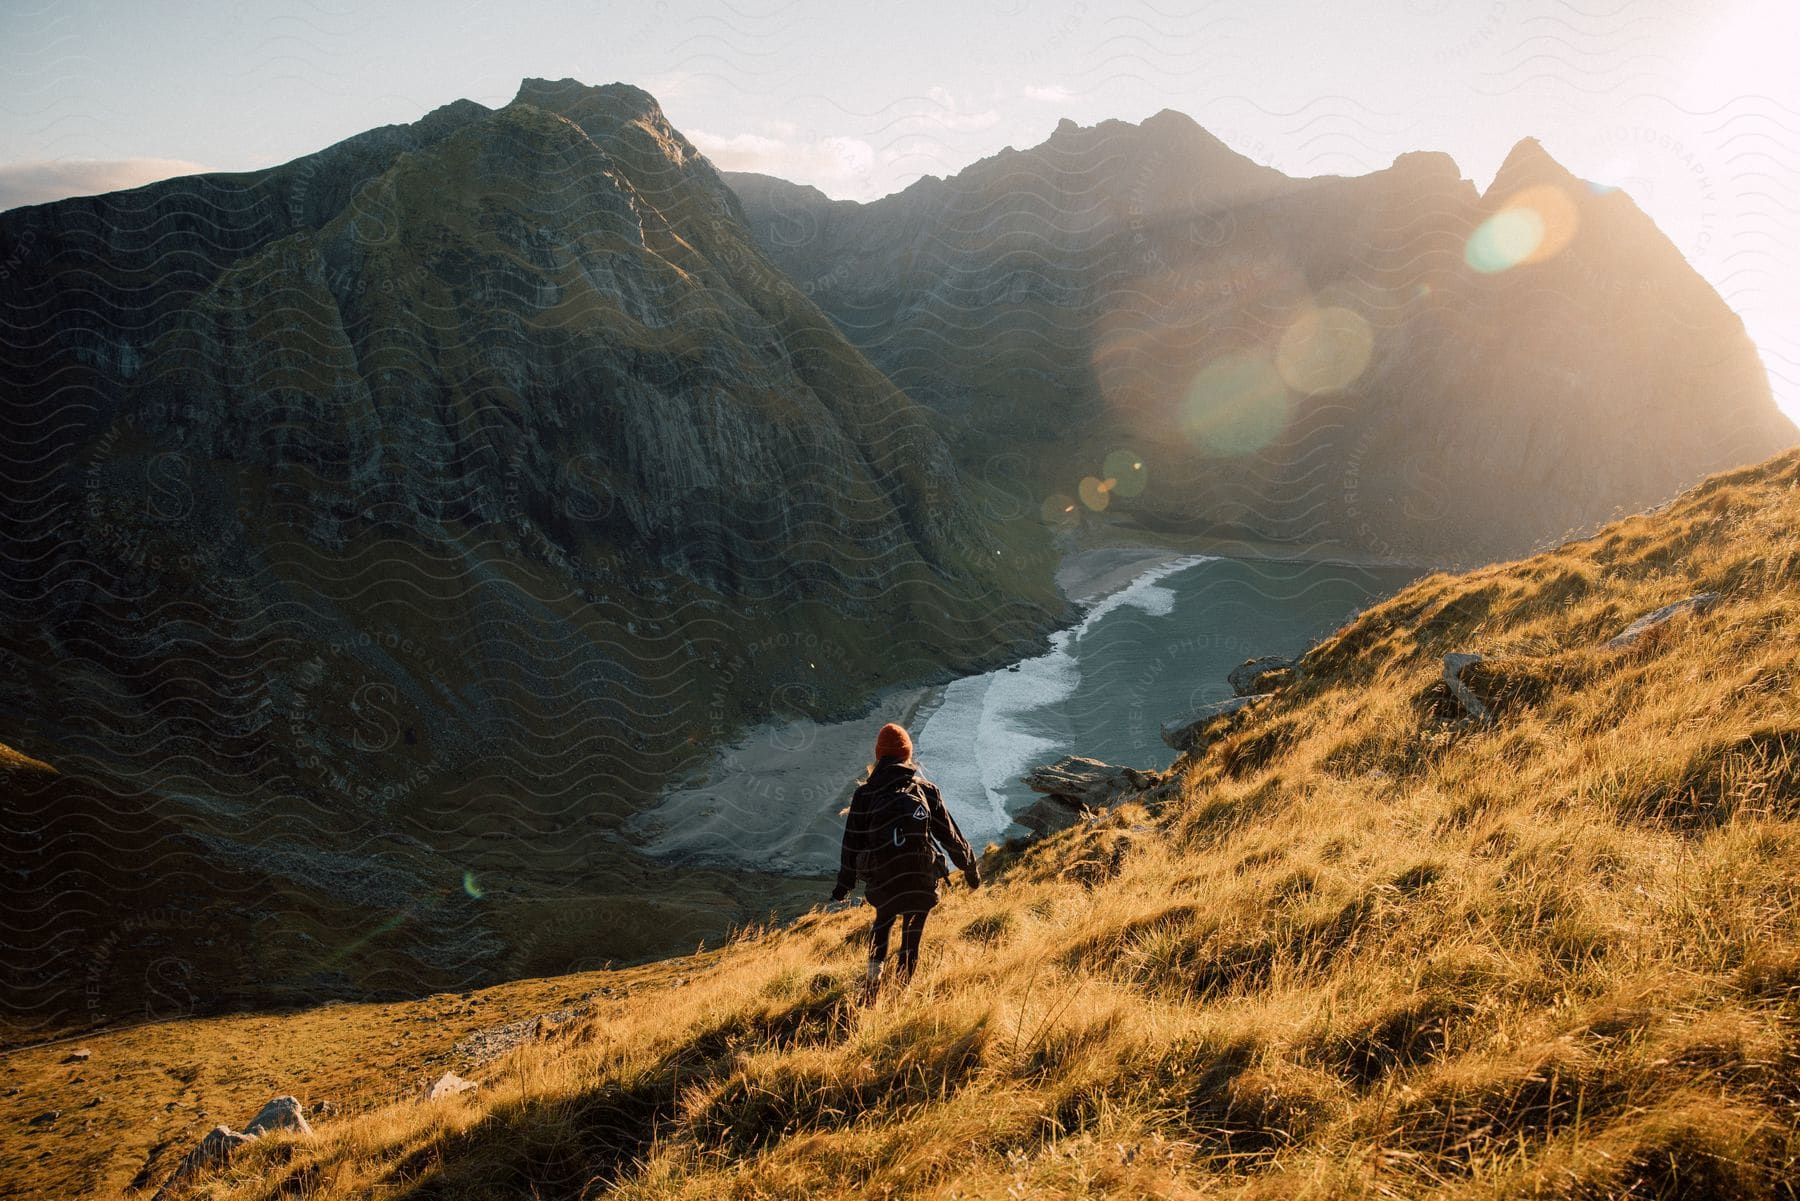 A woman with a backpack on a grassy hill overlooking water and rocky cliffs with the sun low in the sky